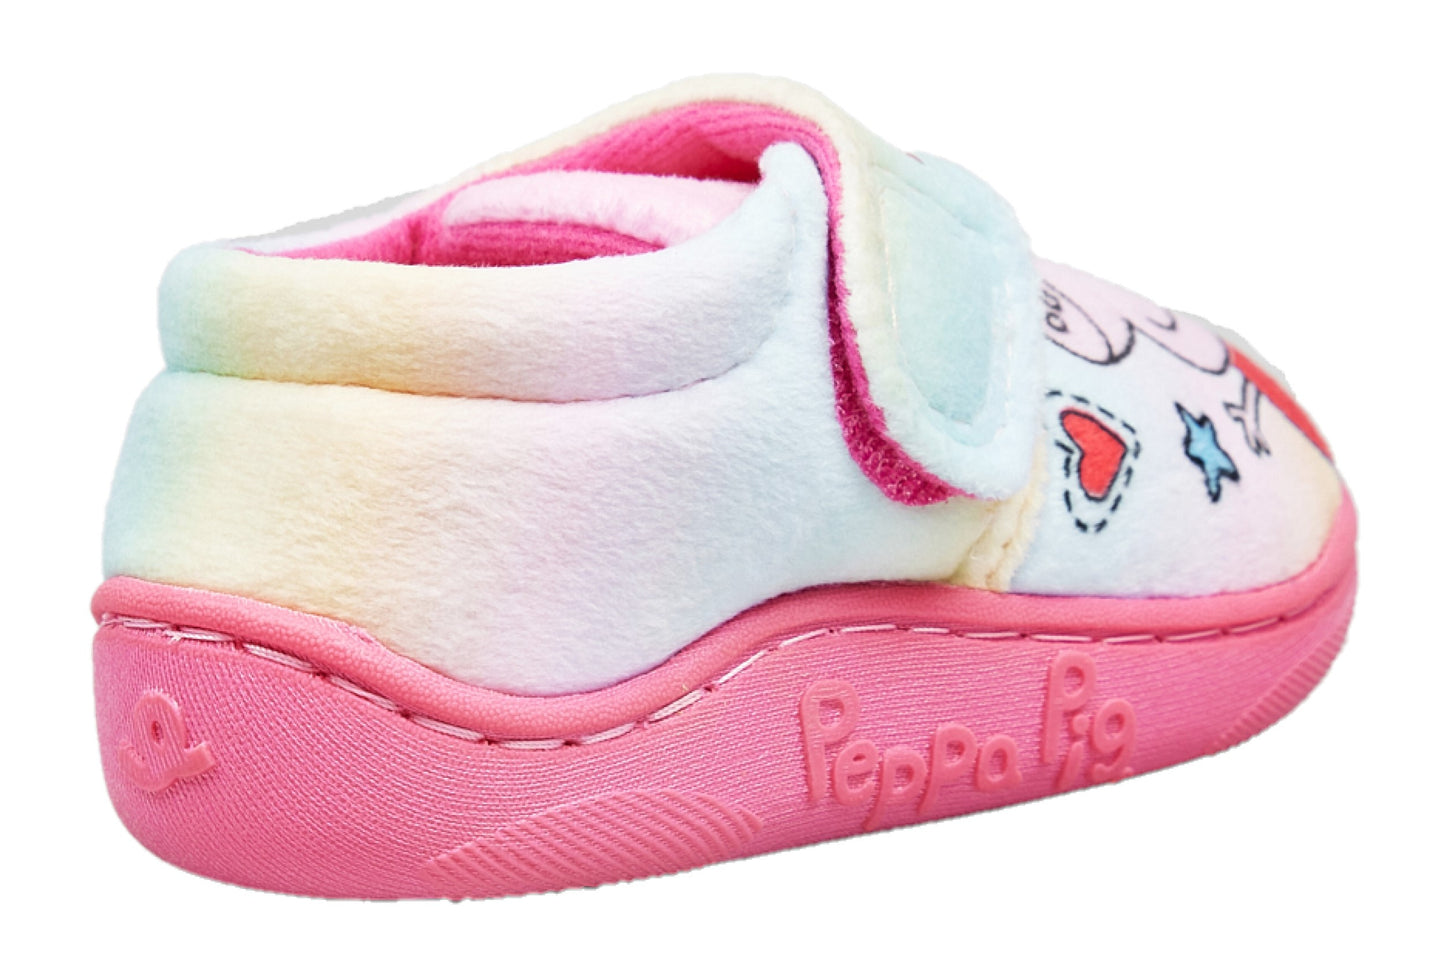 Peppa Pig Girls' Ombre Rainbow Easy Close Pink Slippers